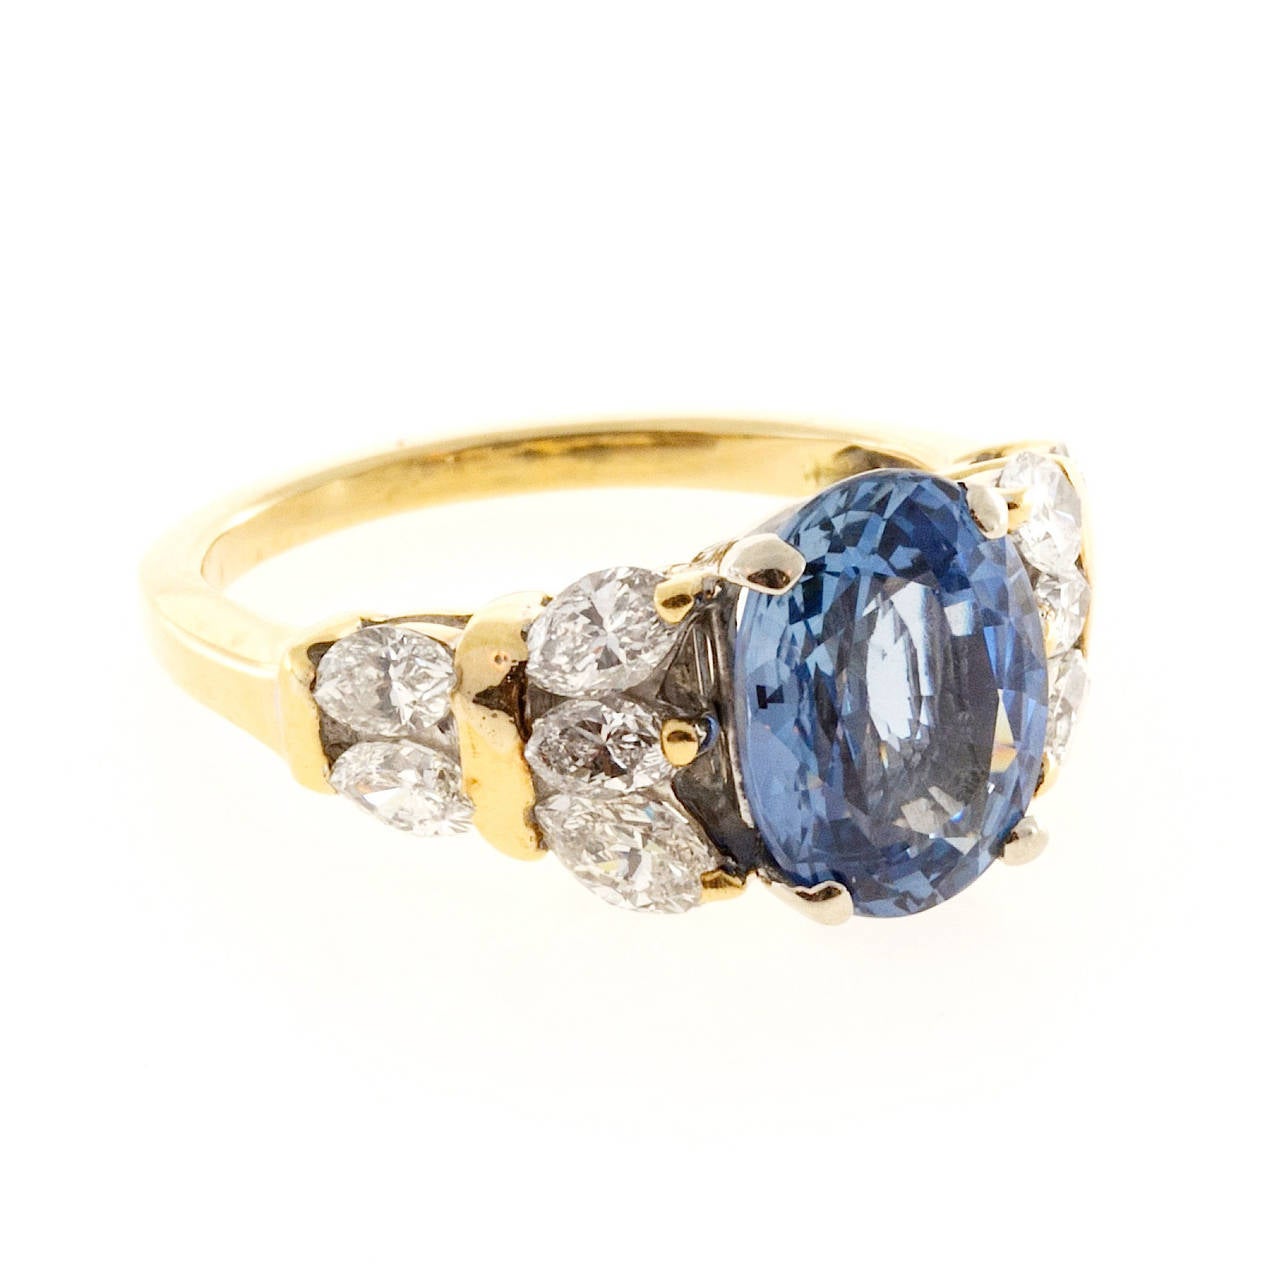 3.11ct fine bright blue Sapphire of medium periwinkle color tone in a very unusual yellow gold ring with Marquise diamond sides.

1 Original certified 3.11ct oval natural periwinkle blue Sapphire simple low level heat only, 9.97 x 7.61 x 4.62,